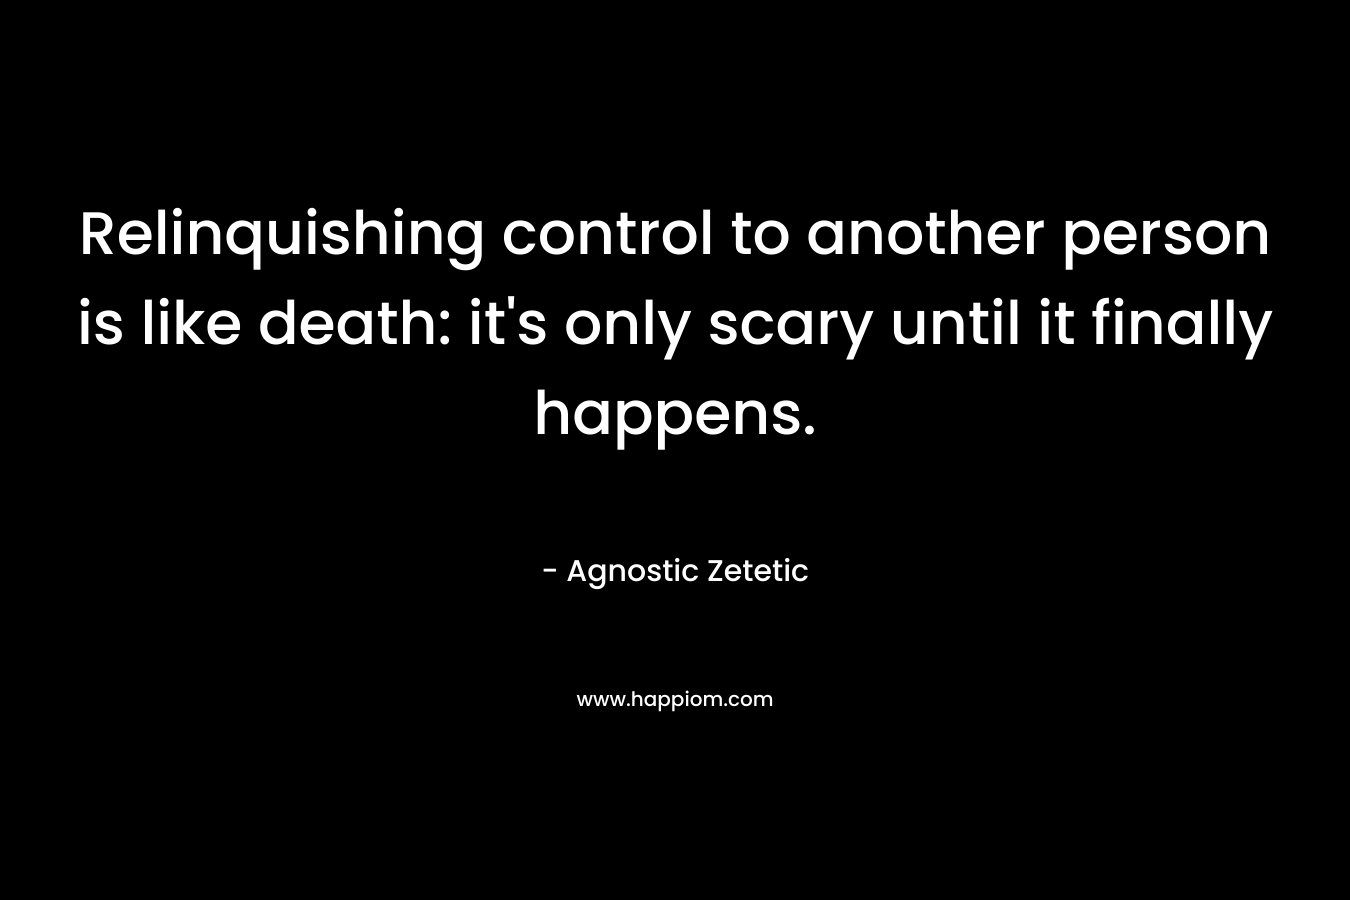 Relinquishing control to another person is like death: it’s only scary until it finally happens. – Agnostic Zetetic